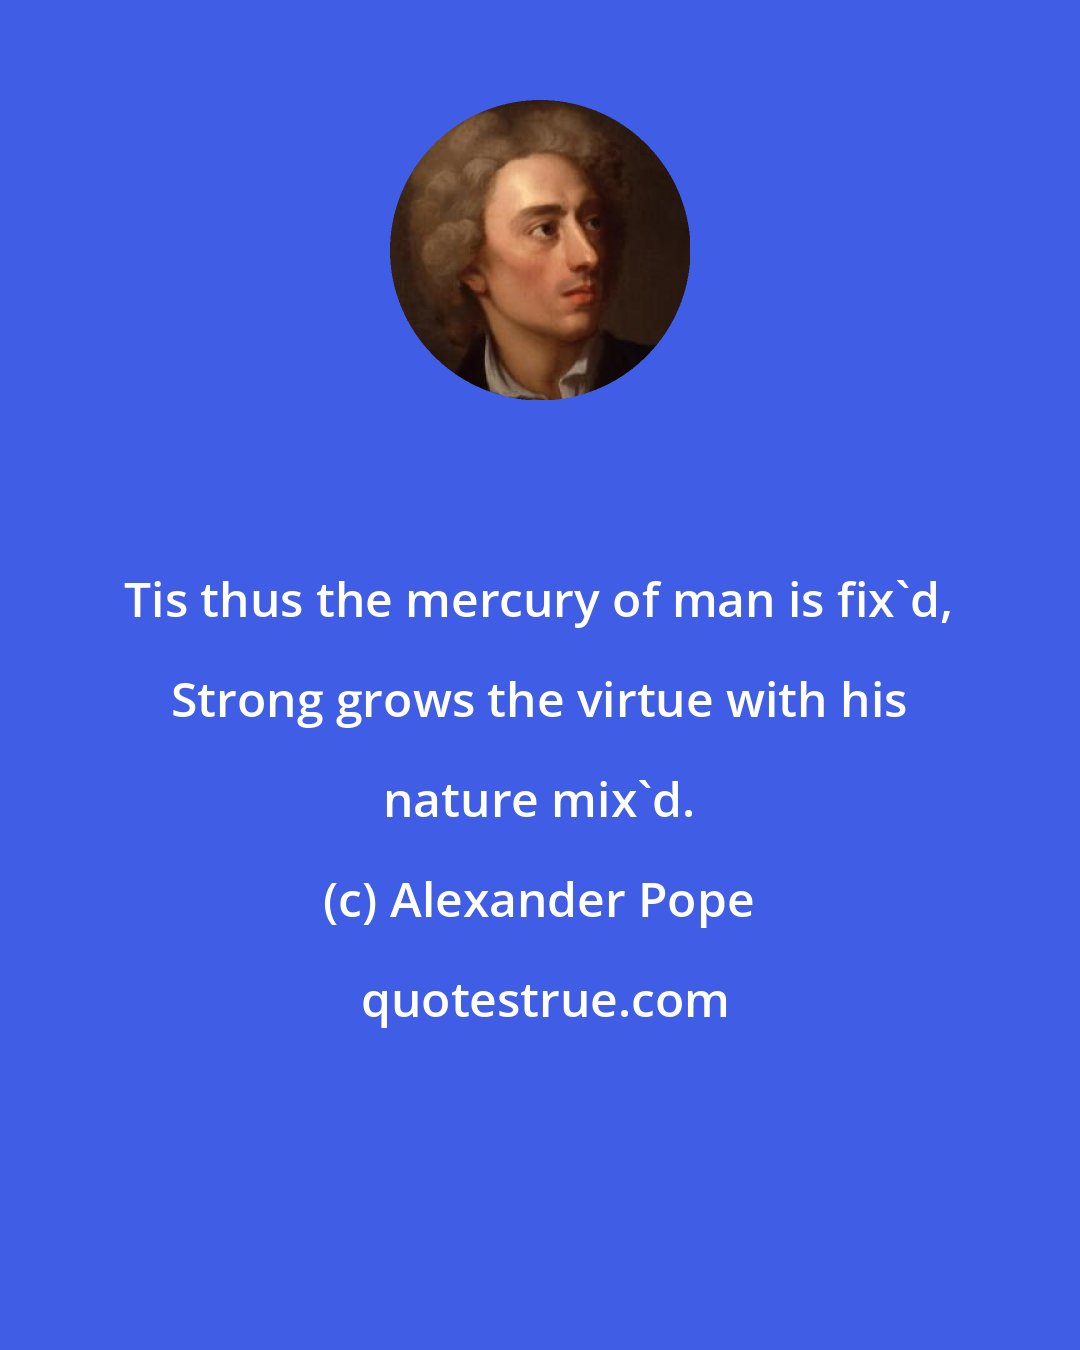 Alexander Pope: Tis thus the mercury of man is fix'd, Strong grows the virtue with his nature mix'd.